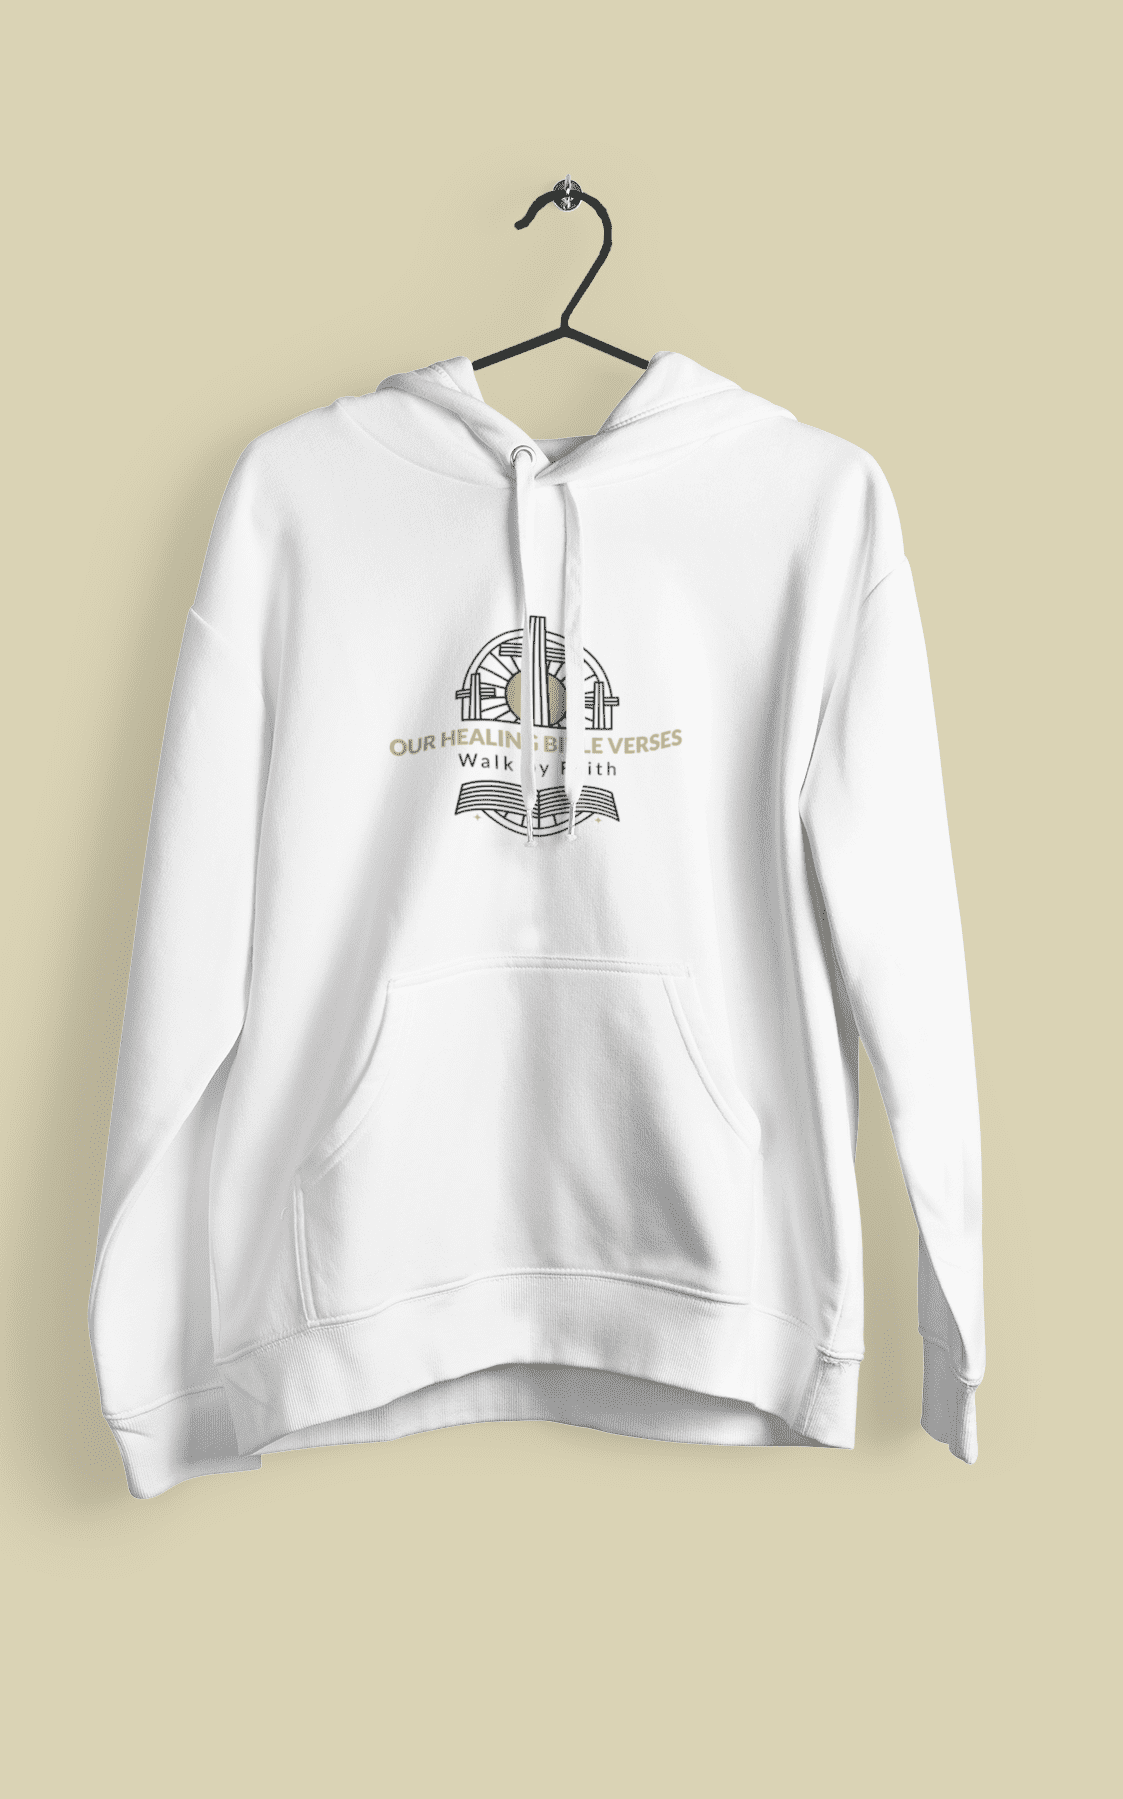 About us mockup of a pullover hoodie hanged on a plain background 1798 el1 edited